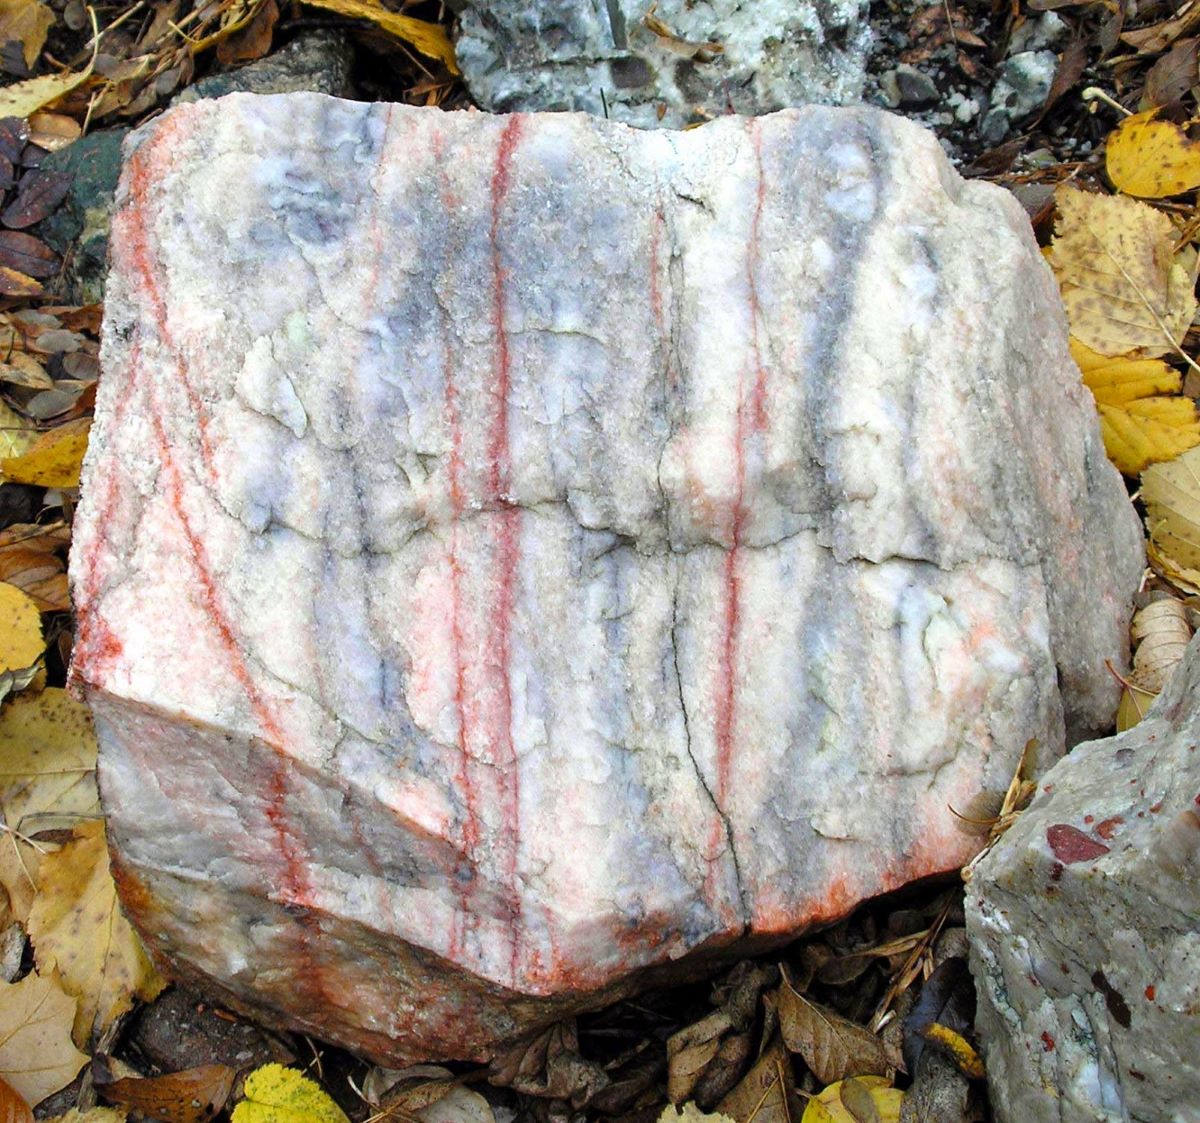 18 Marble Rock Facts - Facts.net